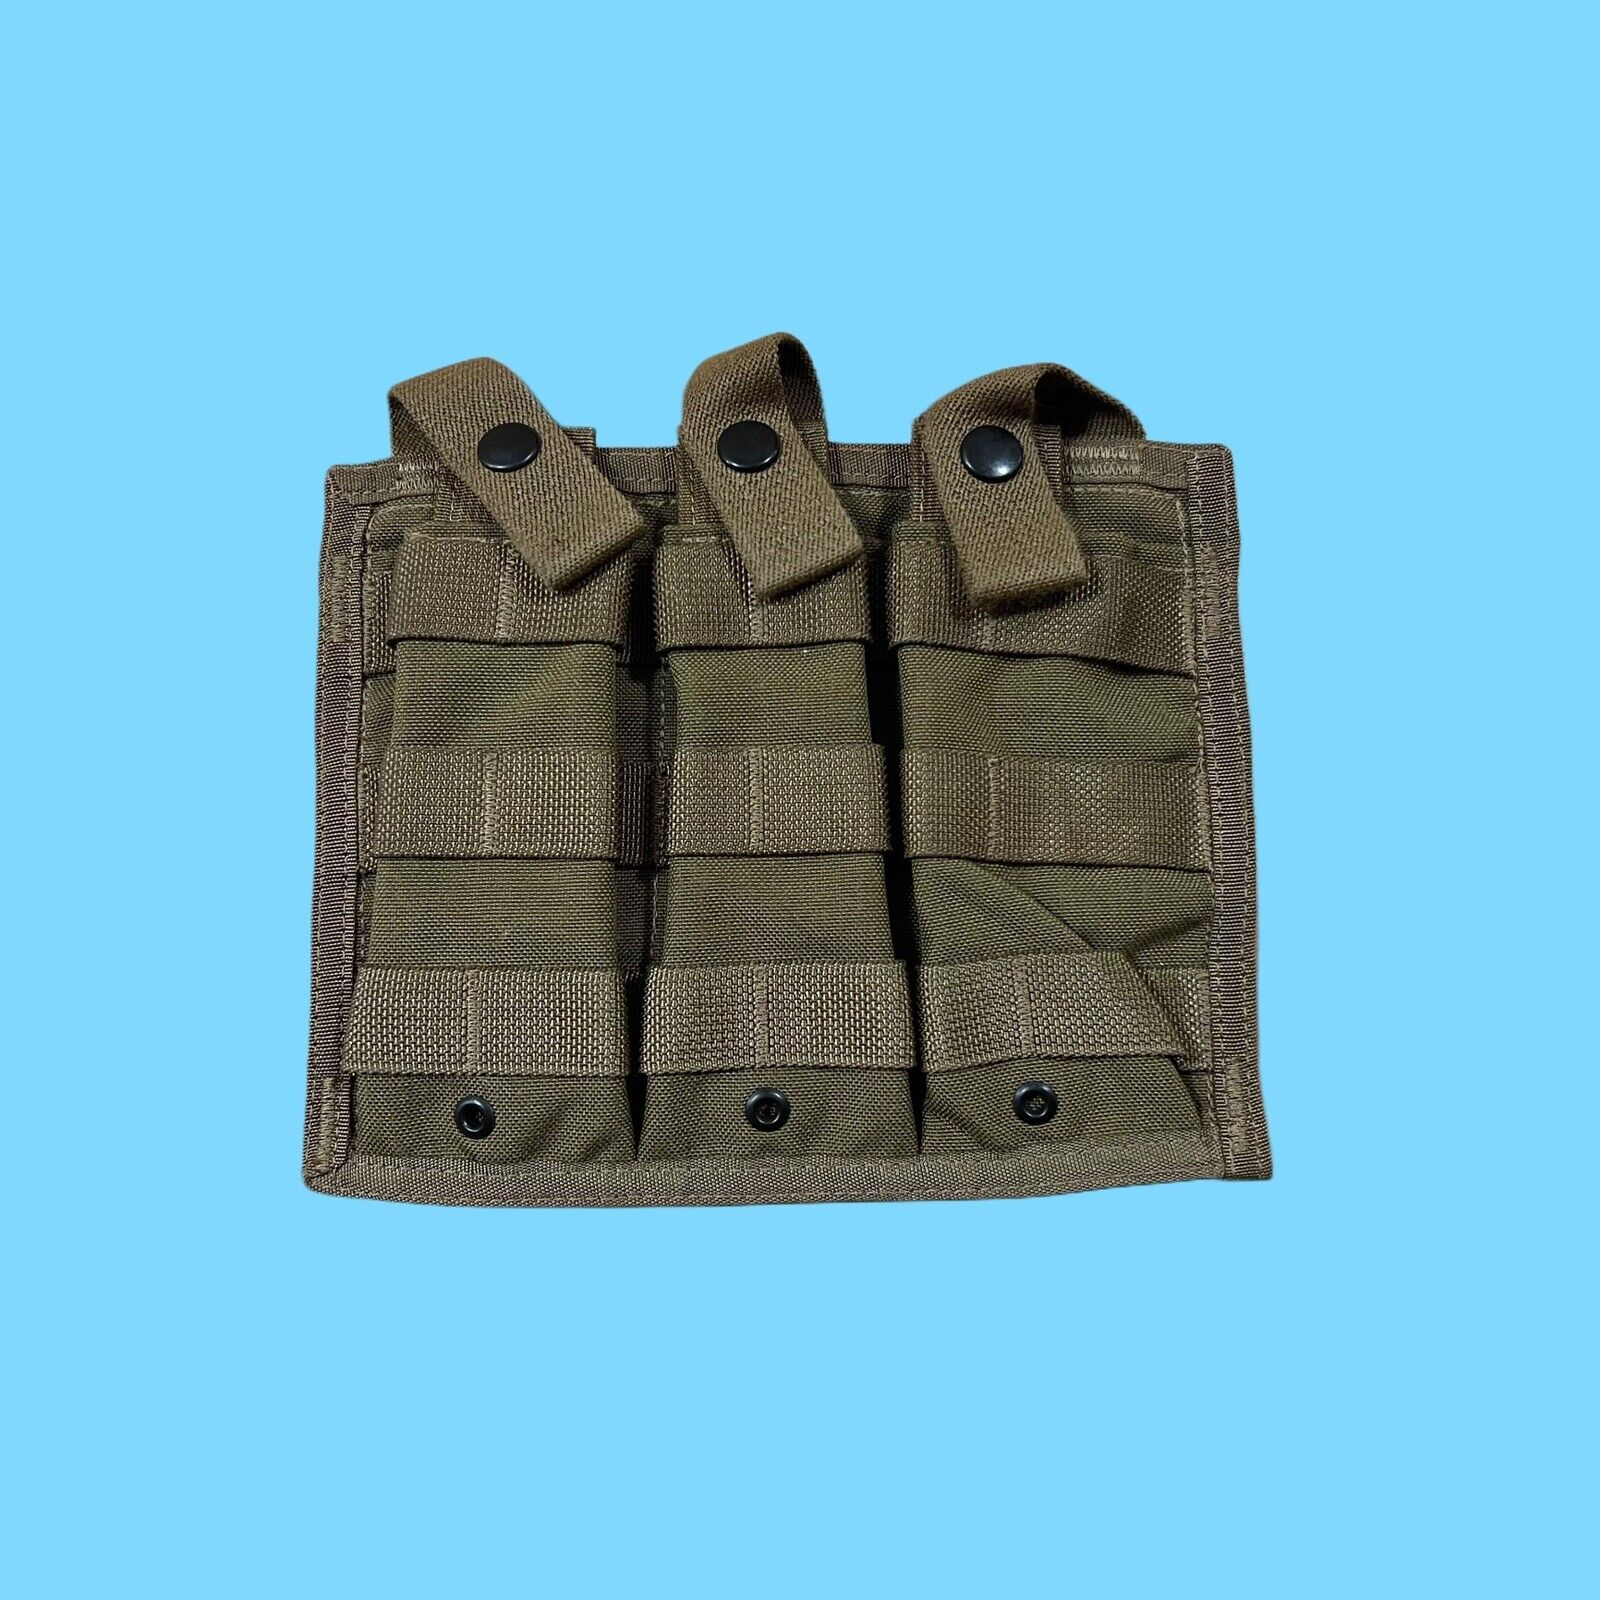 Spec Ops Brand Old Gen M4 Pouch Kangaroo Style